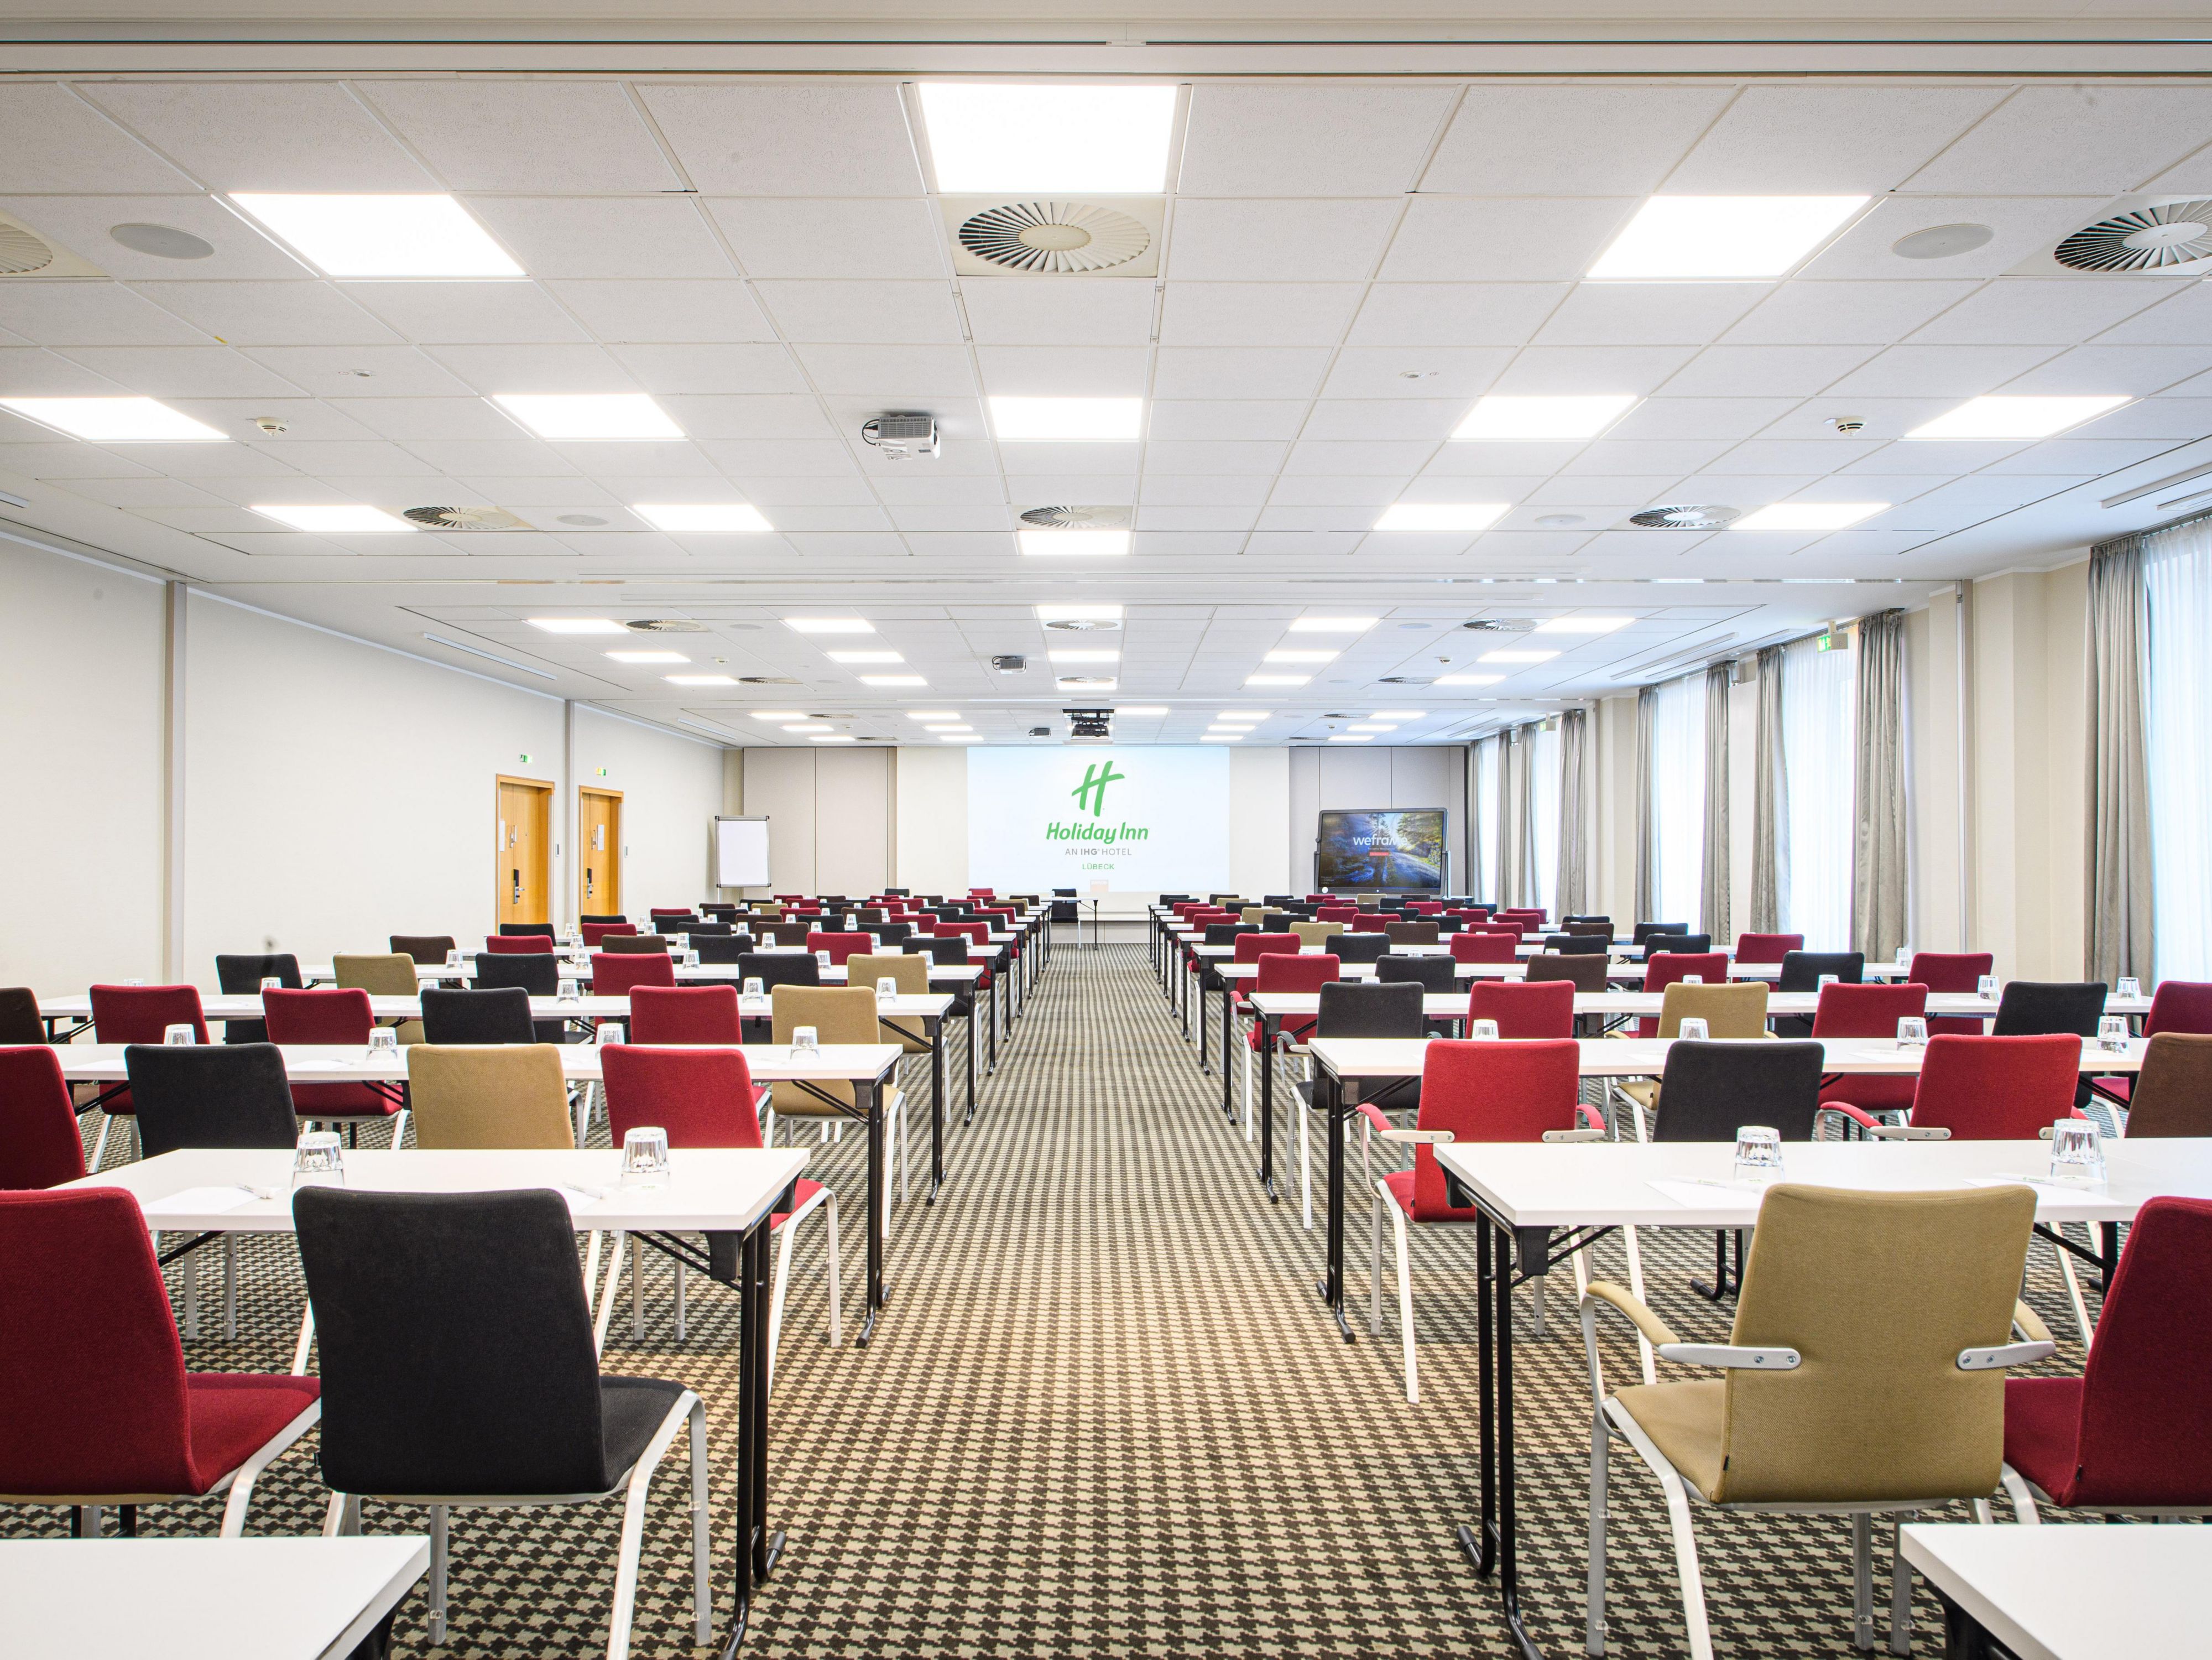 Hold successful meetings and celebrate in style! Holiday Inn® Lübeck offers 10 flexible meeting rooms for up to 350 people. All meeting rooms are located on the ground floor are barrier-free, and feature daylight, air-conditioning system, and modern conference technology.